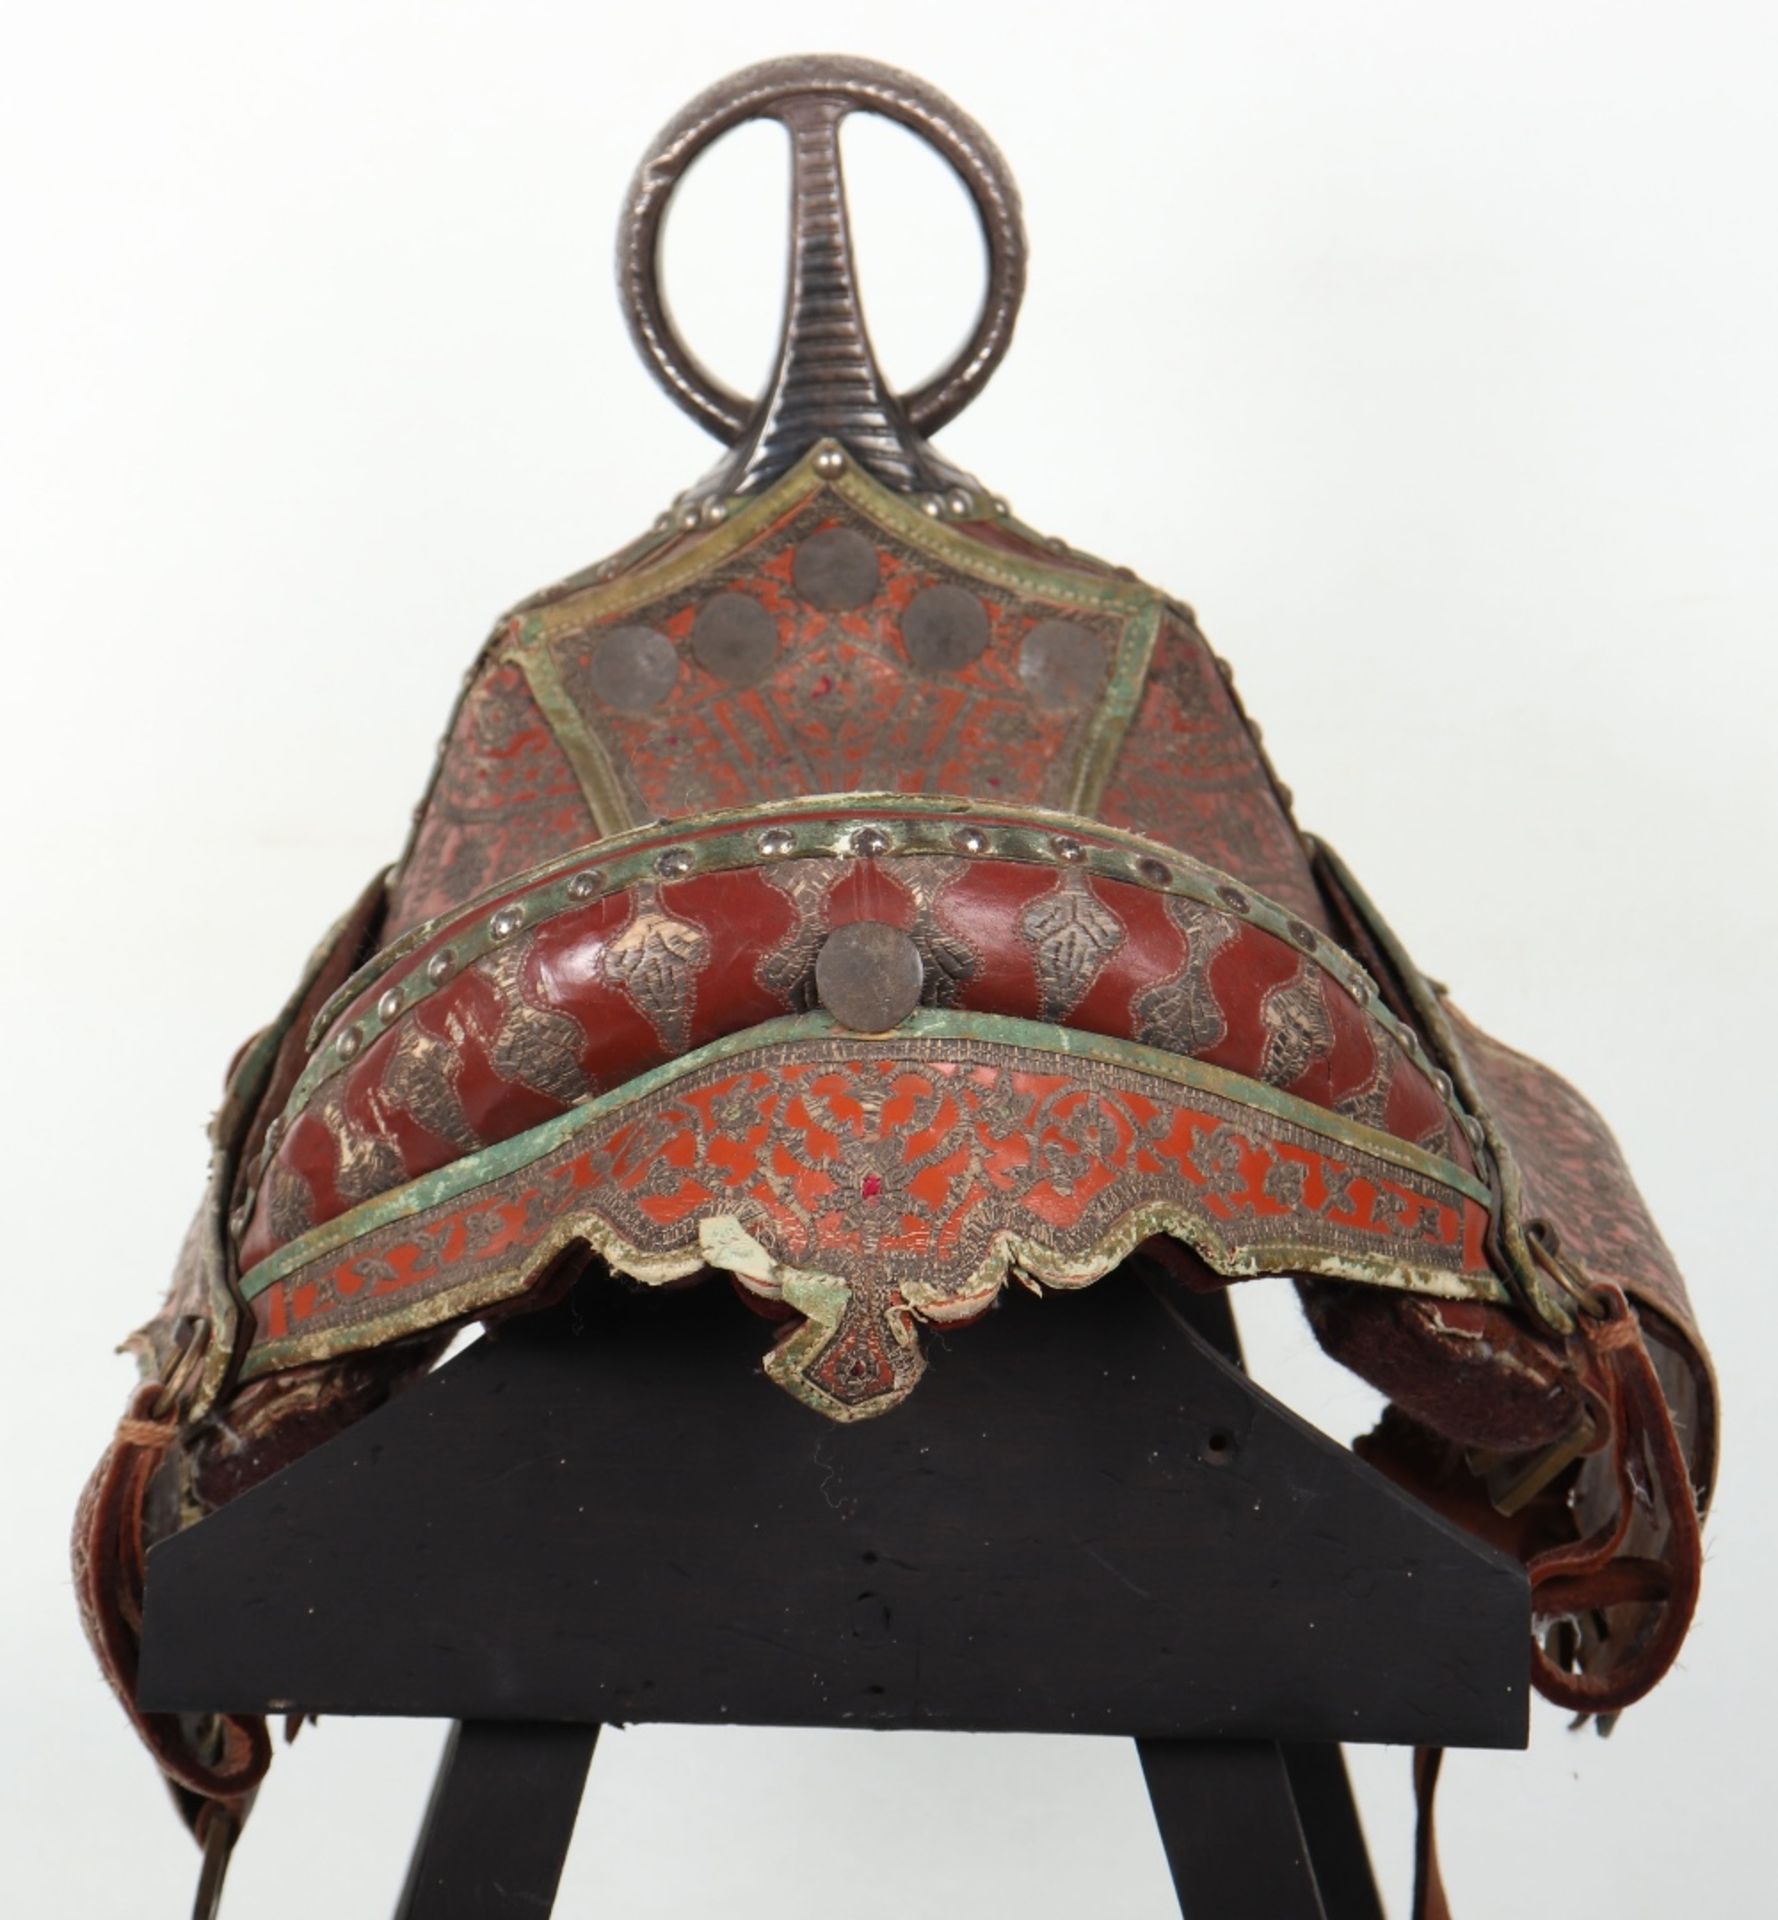 Fine and Scarce North Indian Saddle, Probably Late 19th or Early 20th Century - Image 10 of 12